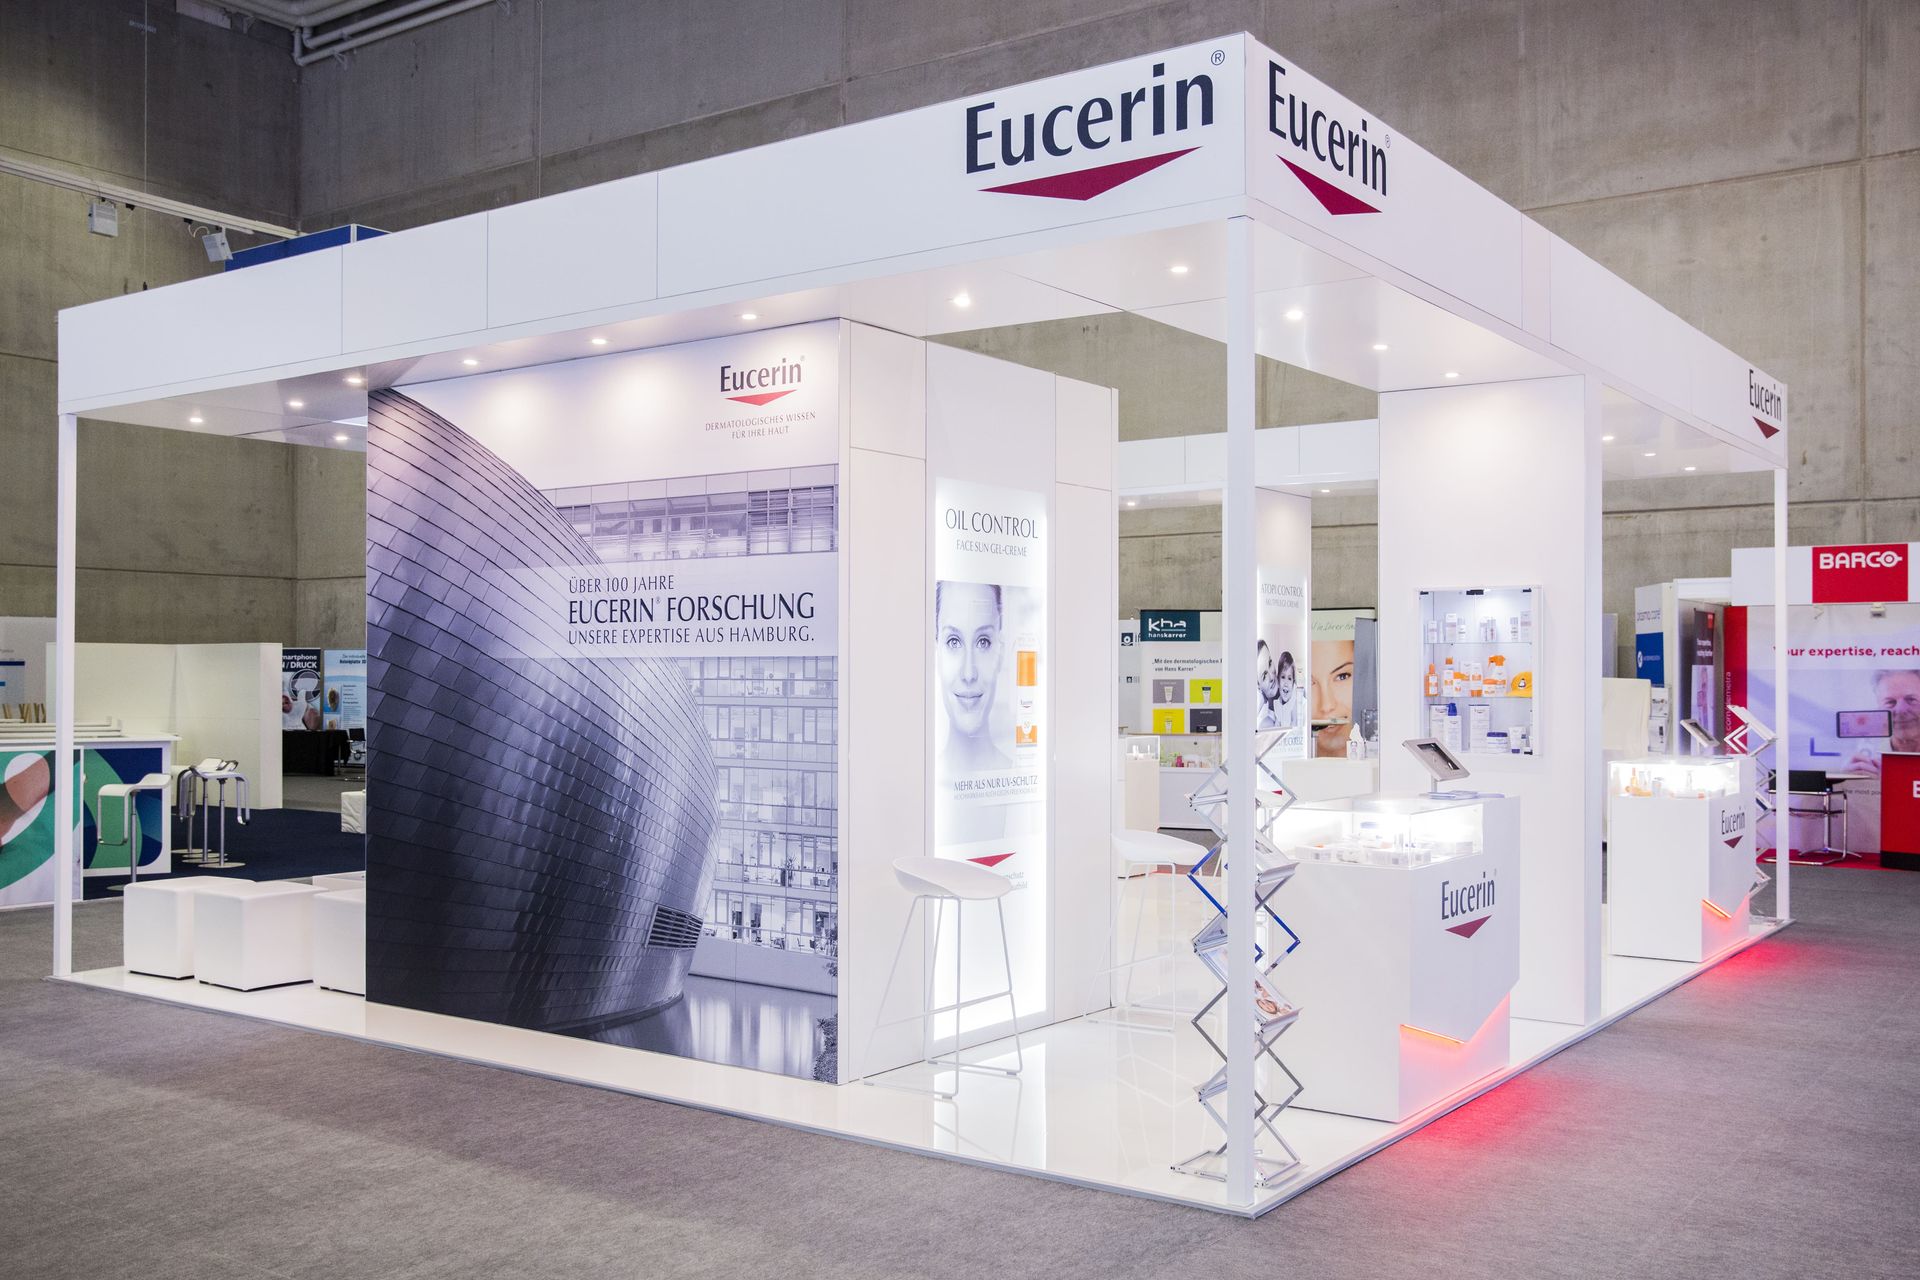 Eucerin booth at 50. DDG-conference Berlin 2019